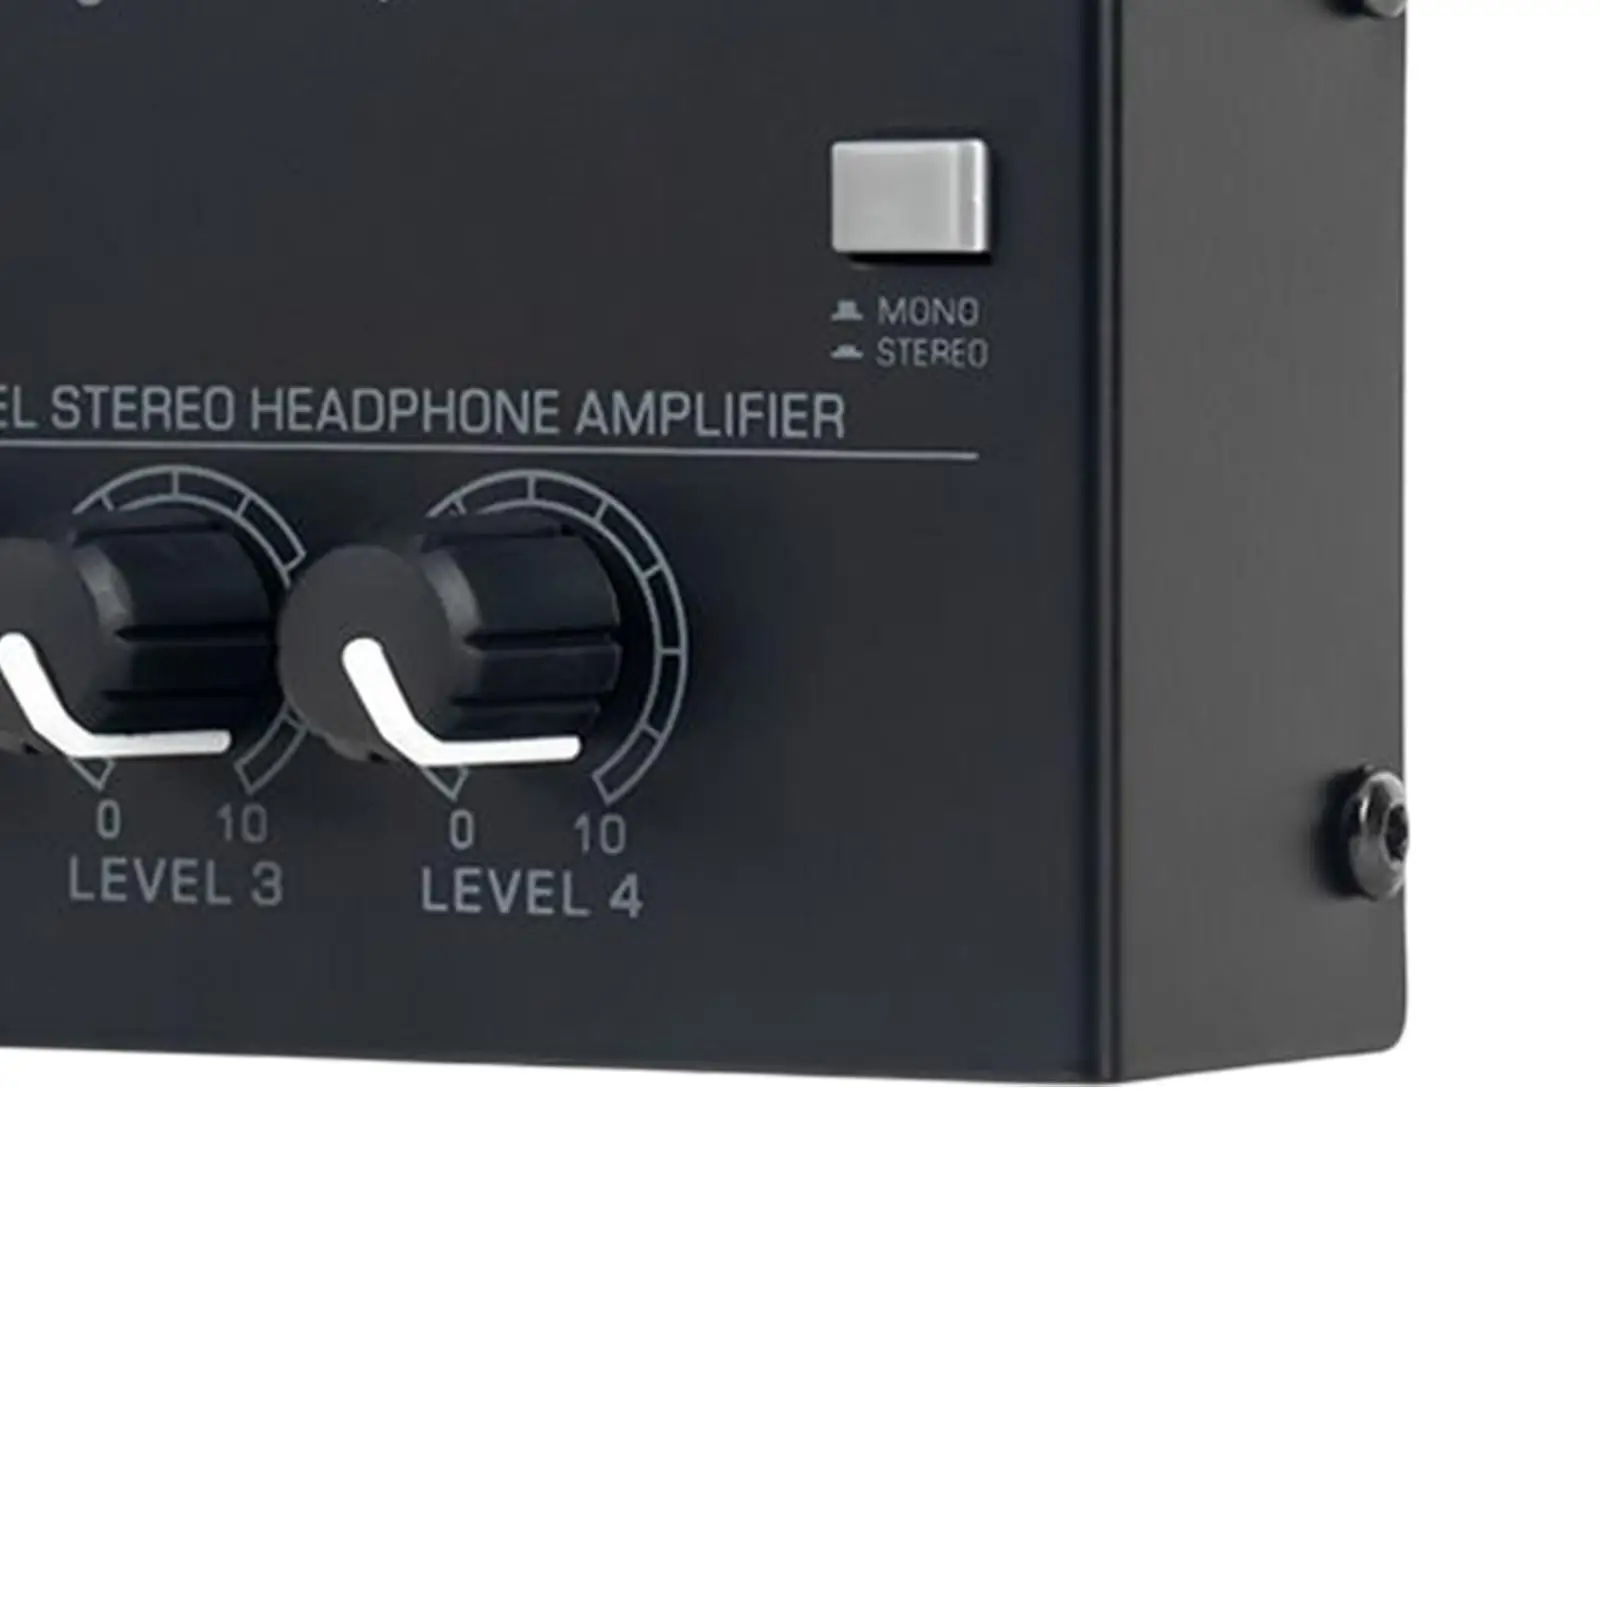 Stereo Headphone Amplifier Stereo Audio Amplifier 4 Channel Multi Channel Studio Headphone Splitter Amplifier for Sound Mixer